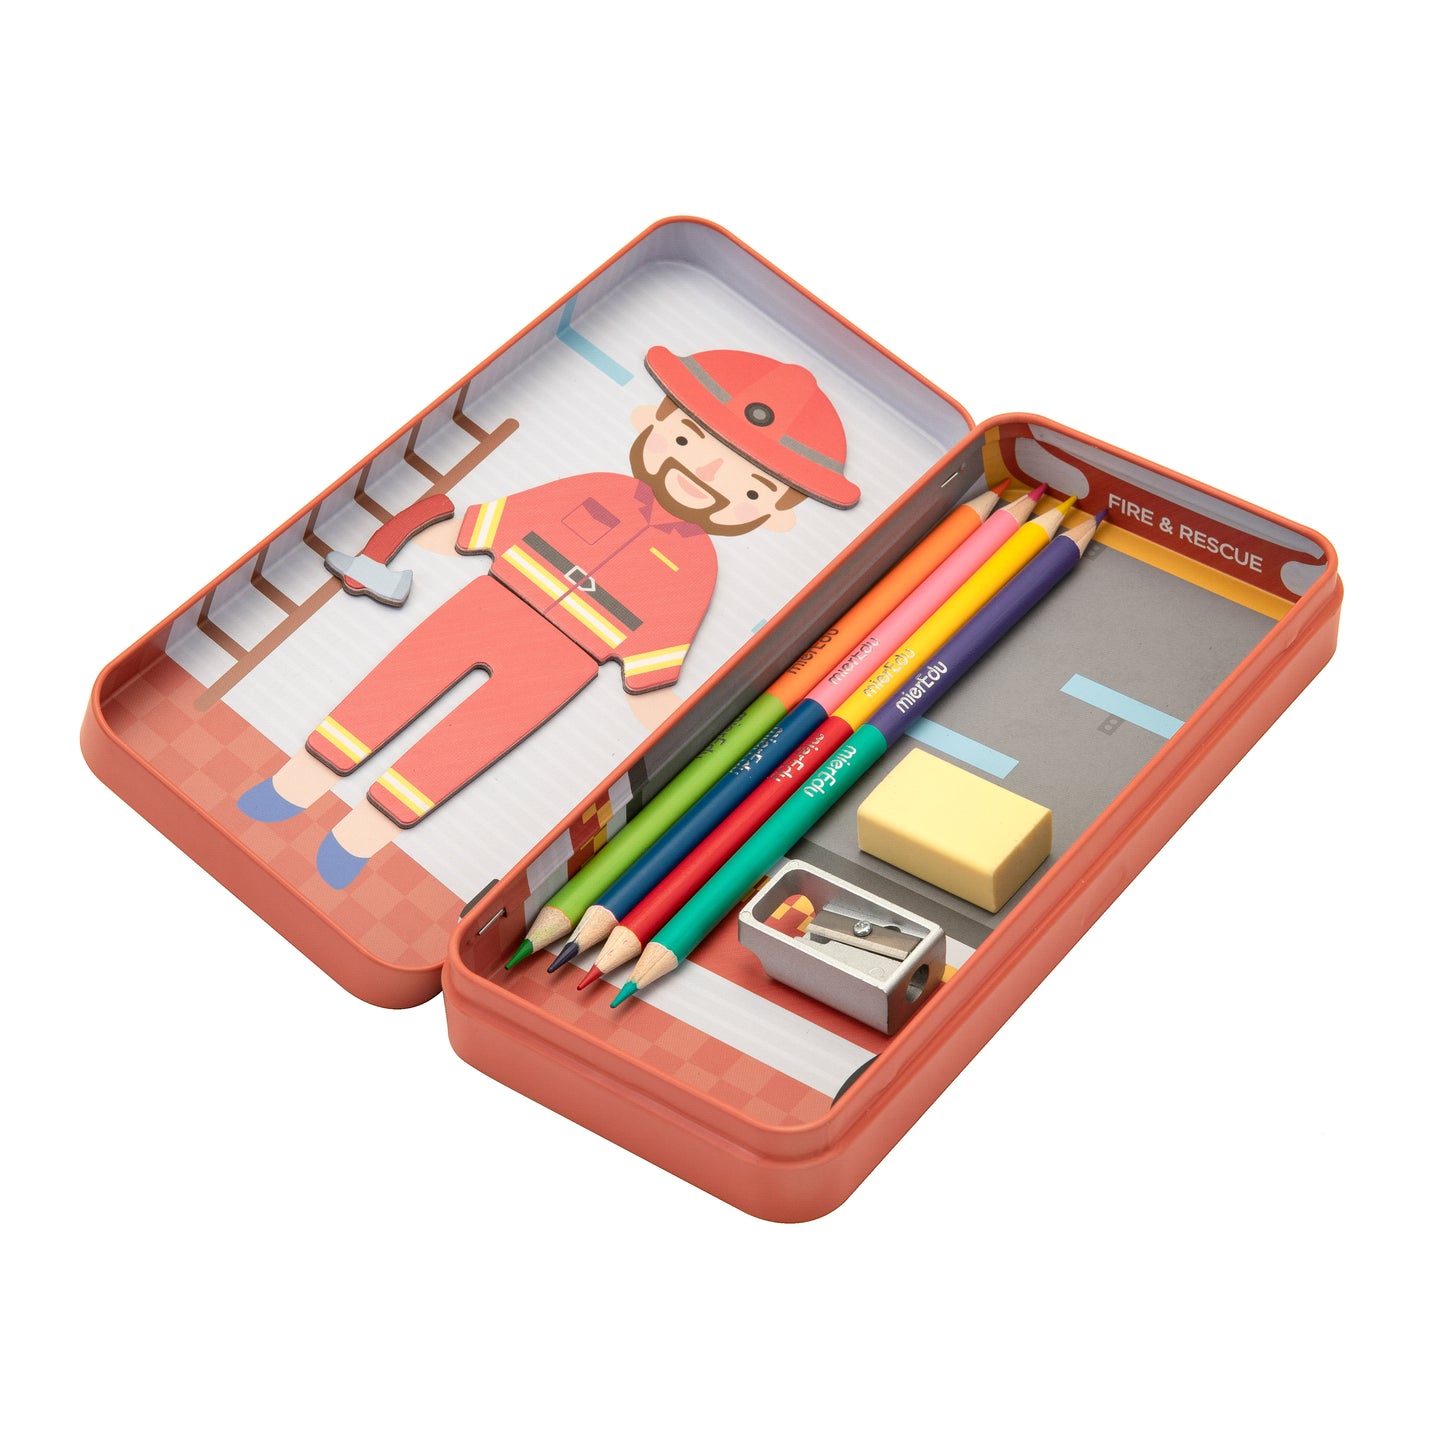 Travel Magnetic Puzzle Box - Heroes - Firefighter